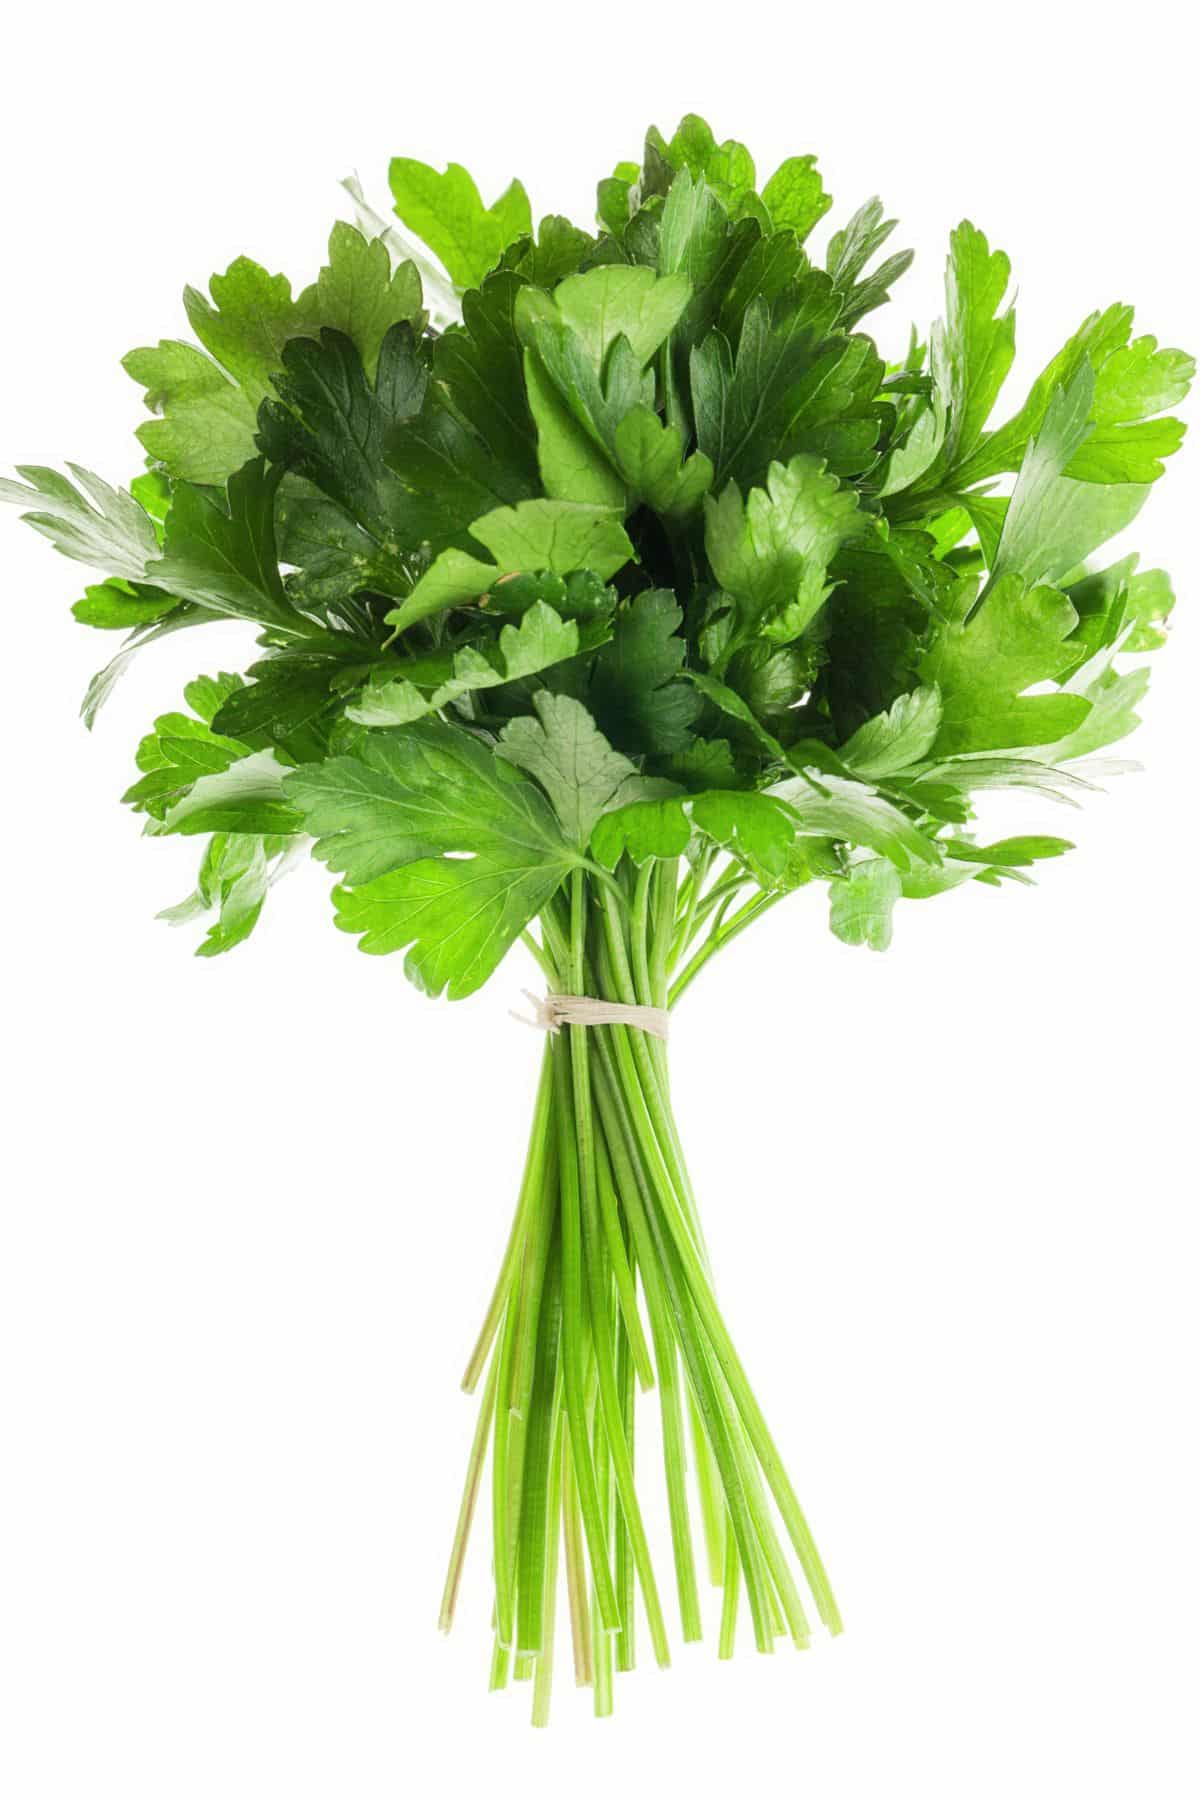 Bunch of fresh parsley on white background.